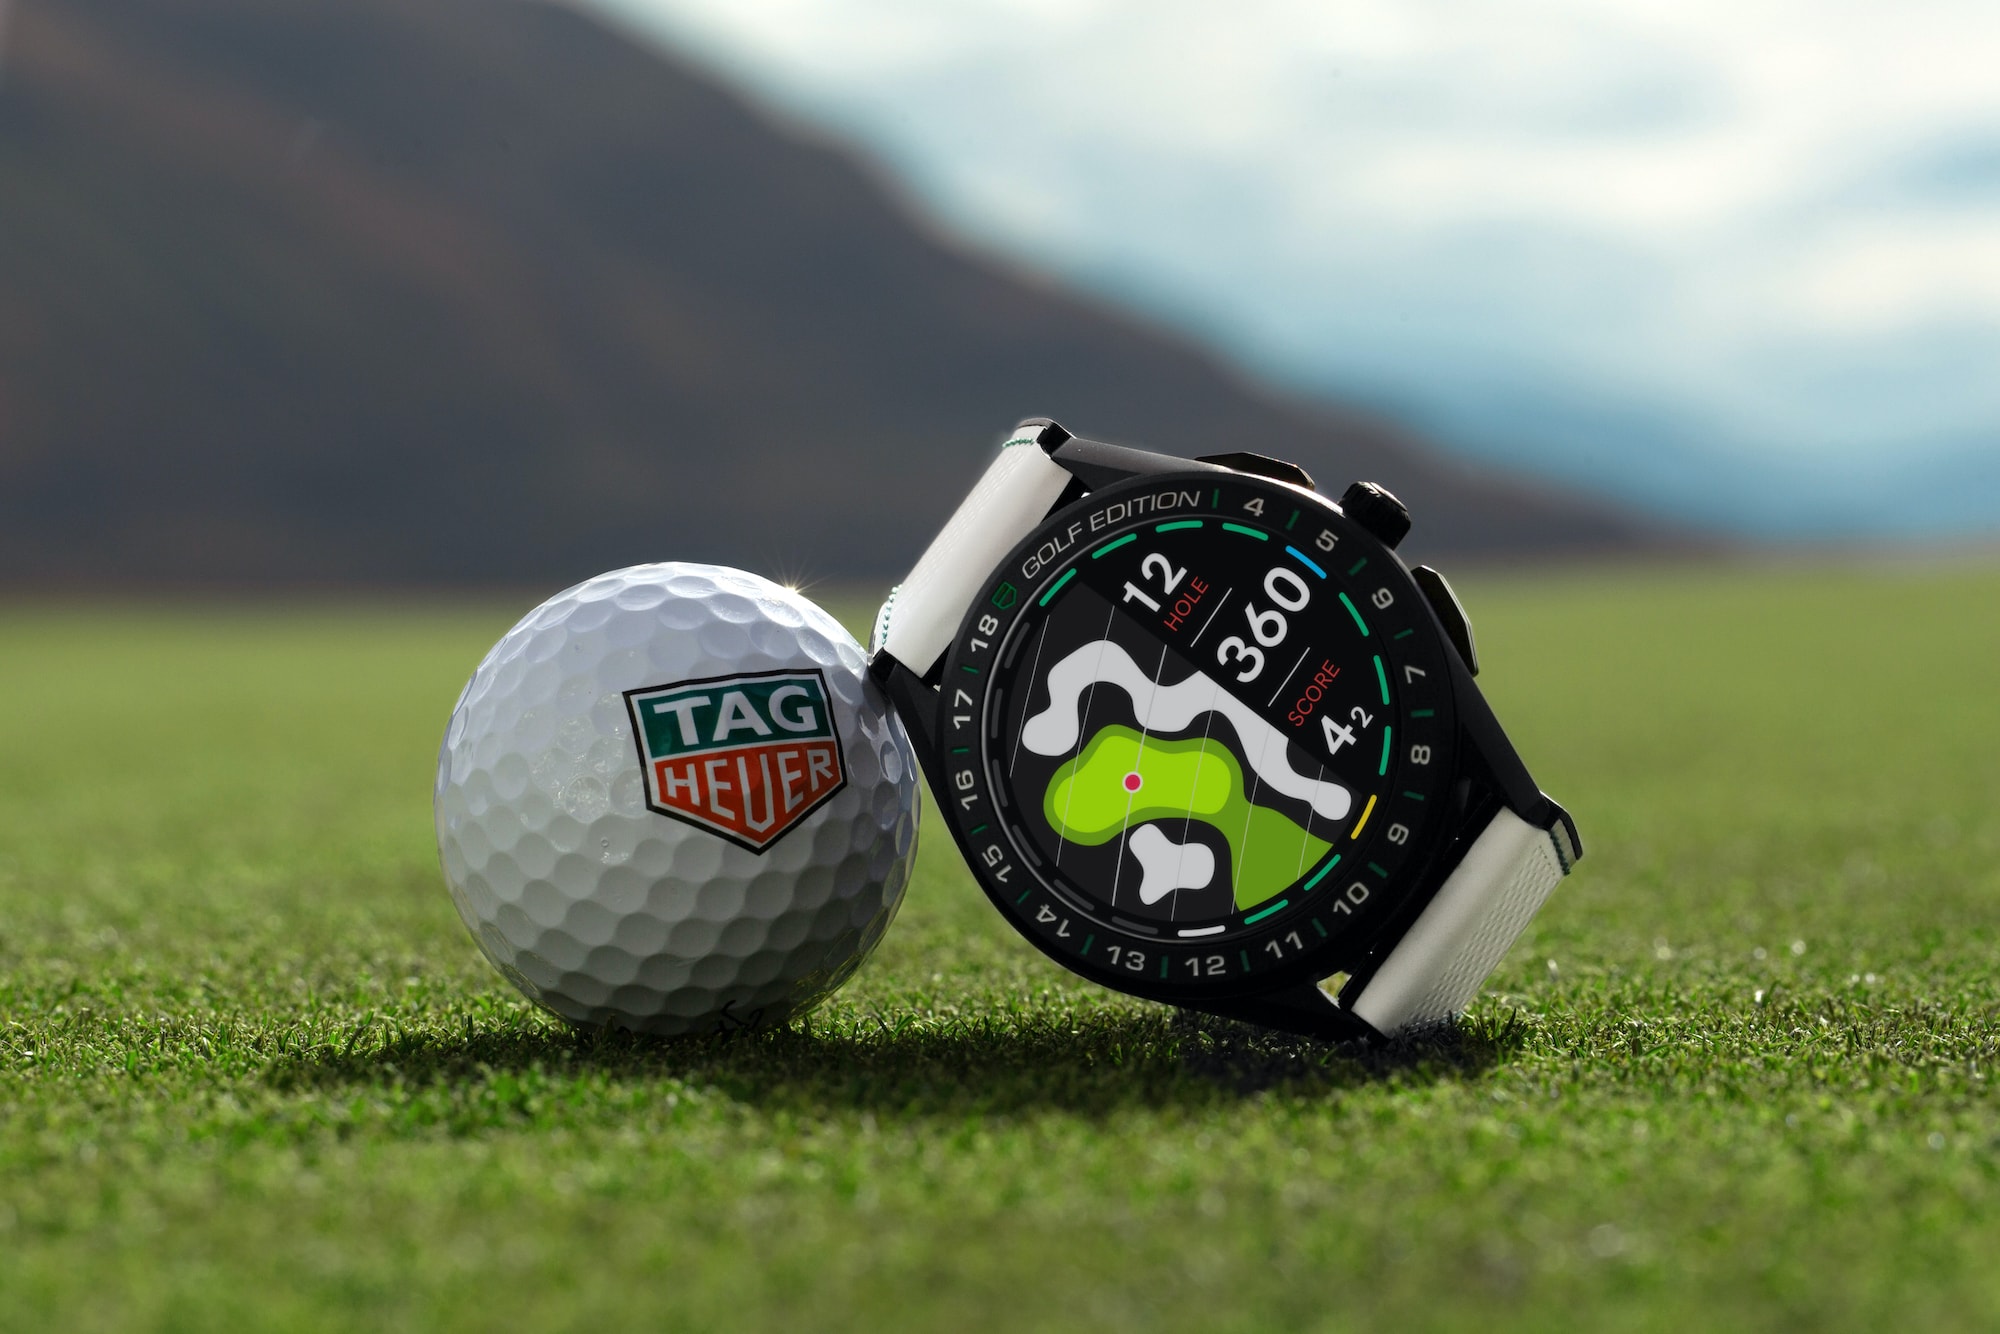 TAG Heuer 推出全新 Connected 智能腕表高尔夫版